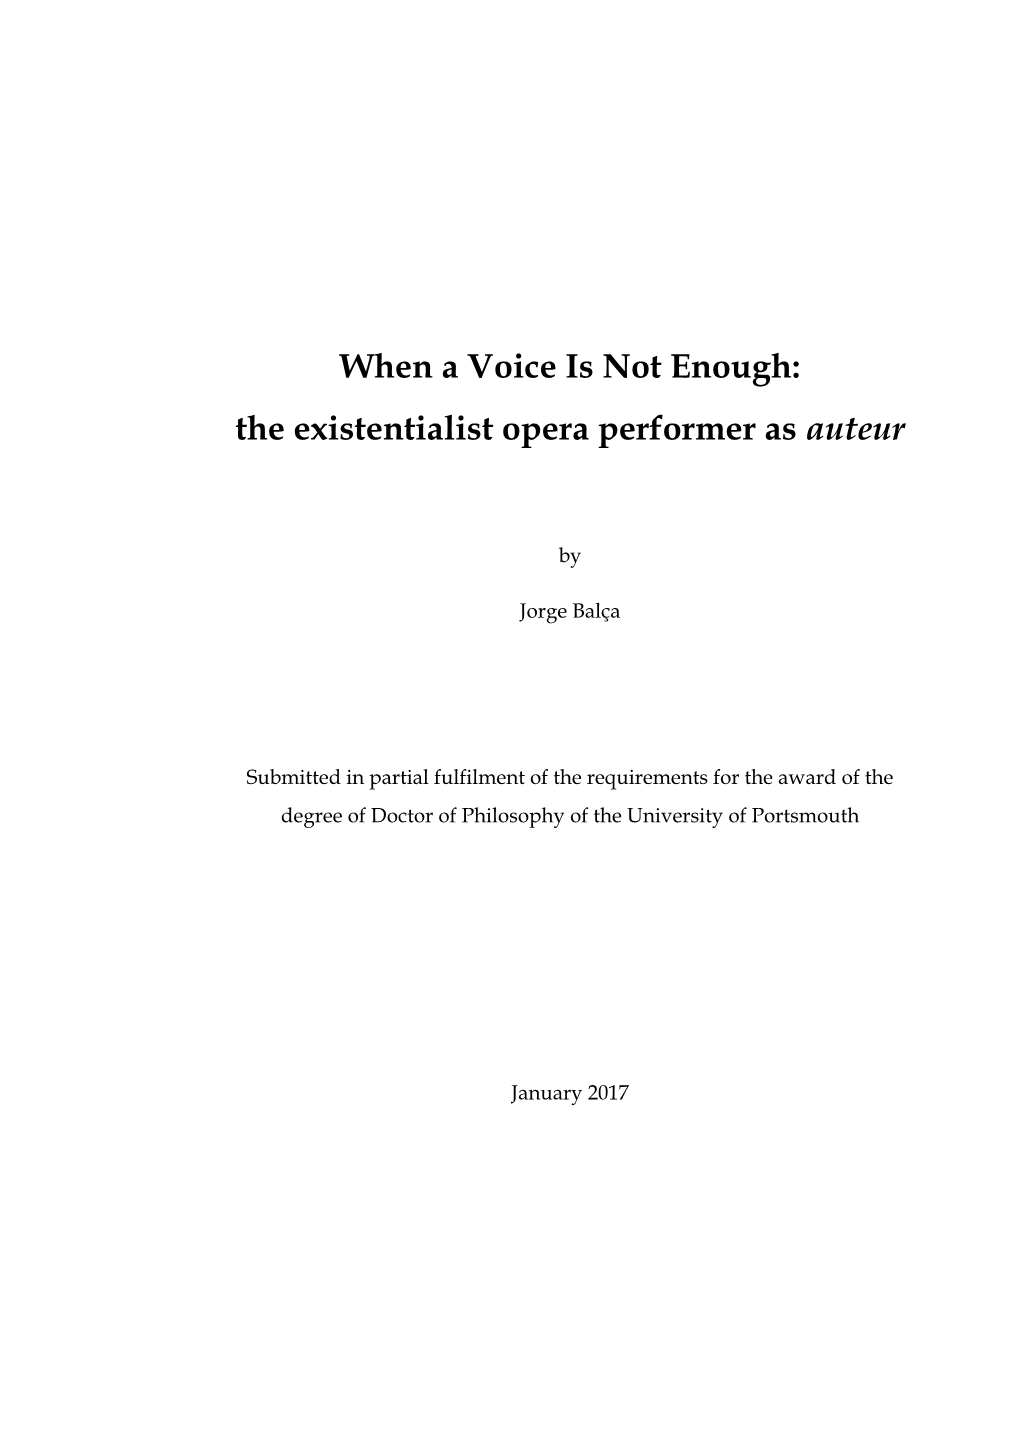 When a Voice Is Not Enough: the Existentialist Opera Performer As Auteur